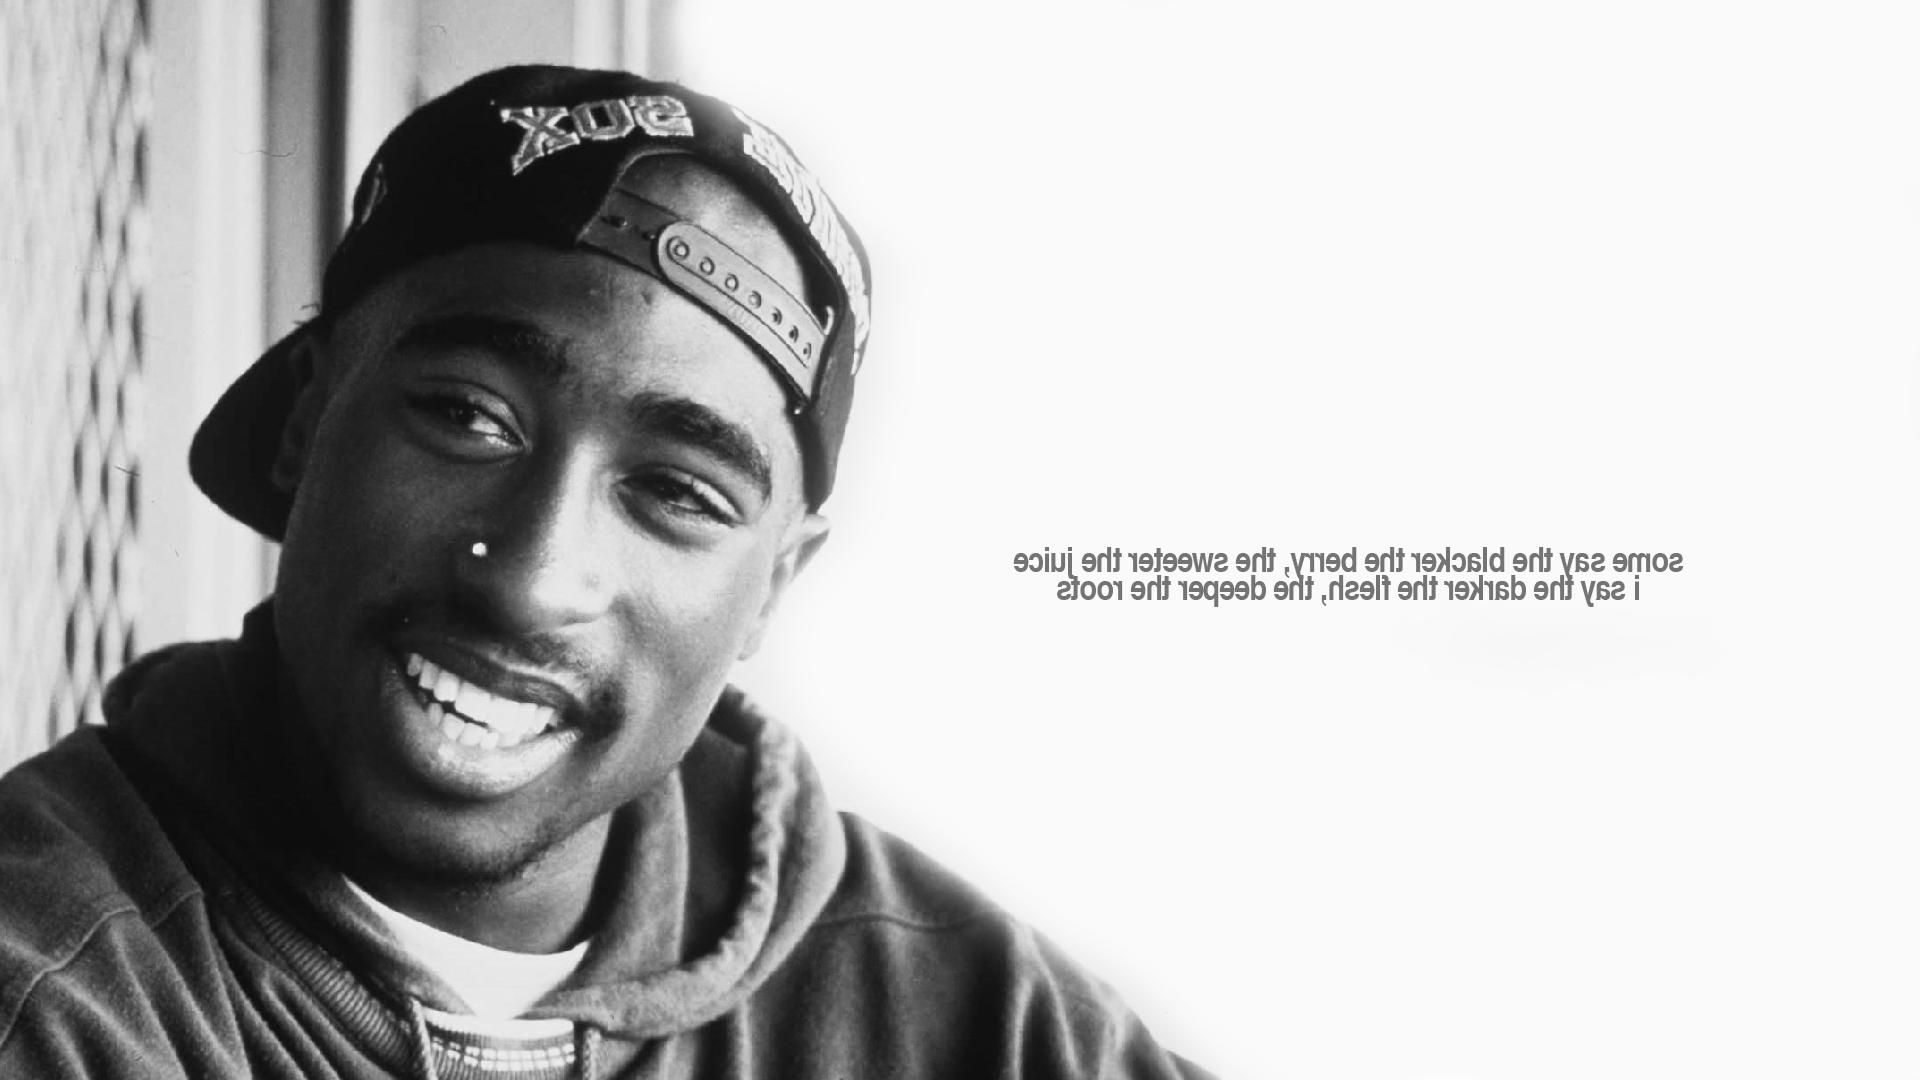 Free download Tupac Background Download [1920x1080] for your Desktop, Mobile & Tablet. Explore 2pac Wallpaper. Tupac Shakur Wallpaper, 2pac Wallpaper Thug Life, 2Pac Wallpaper Free Download